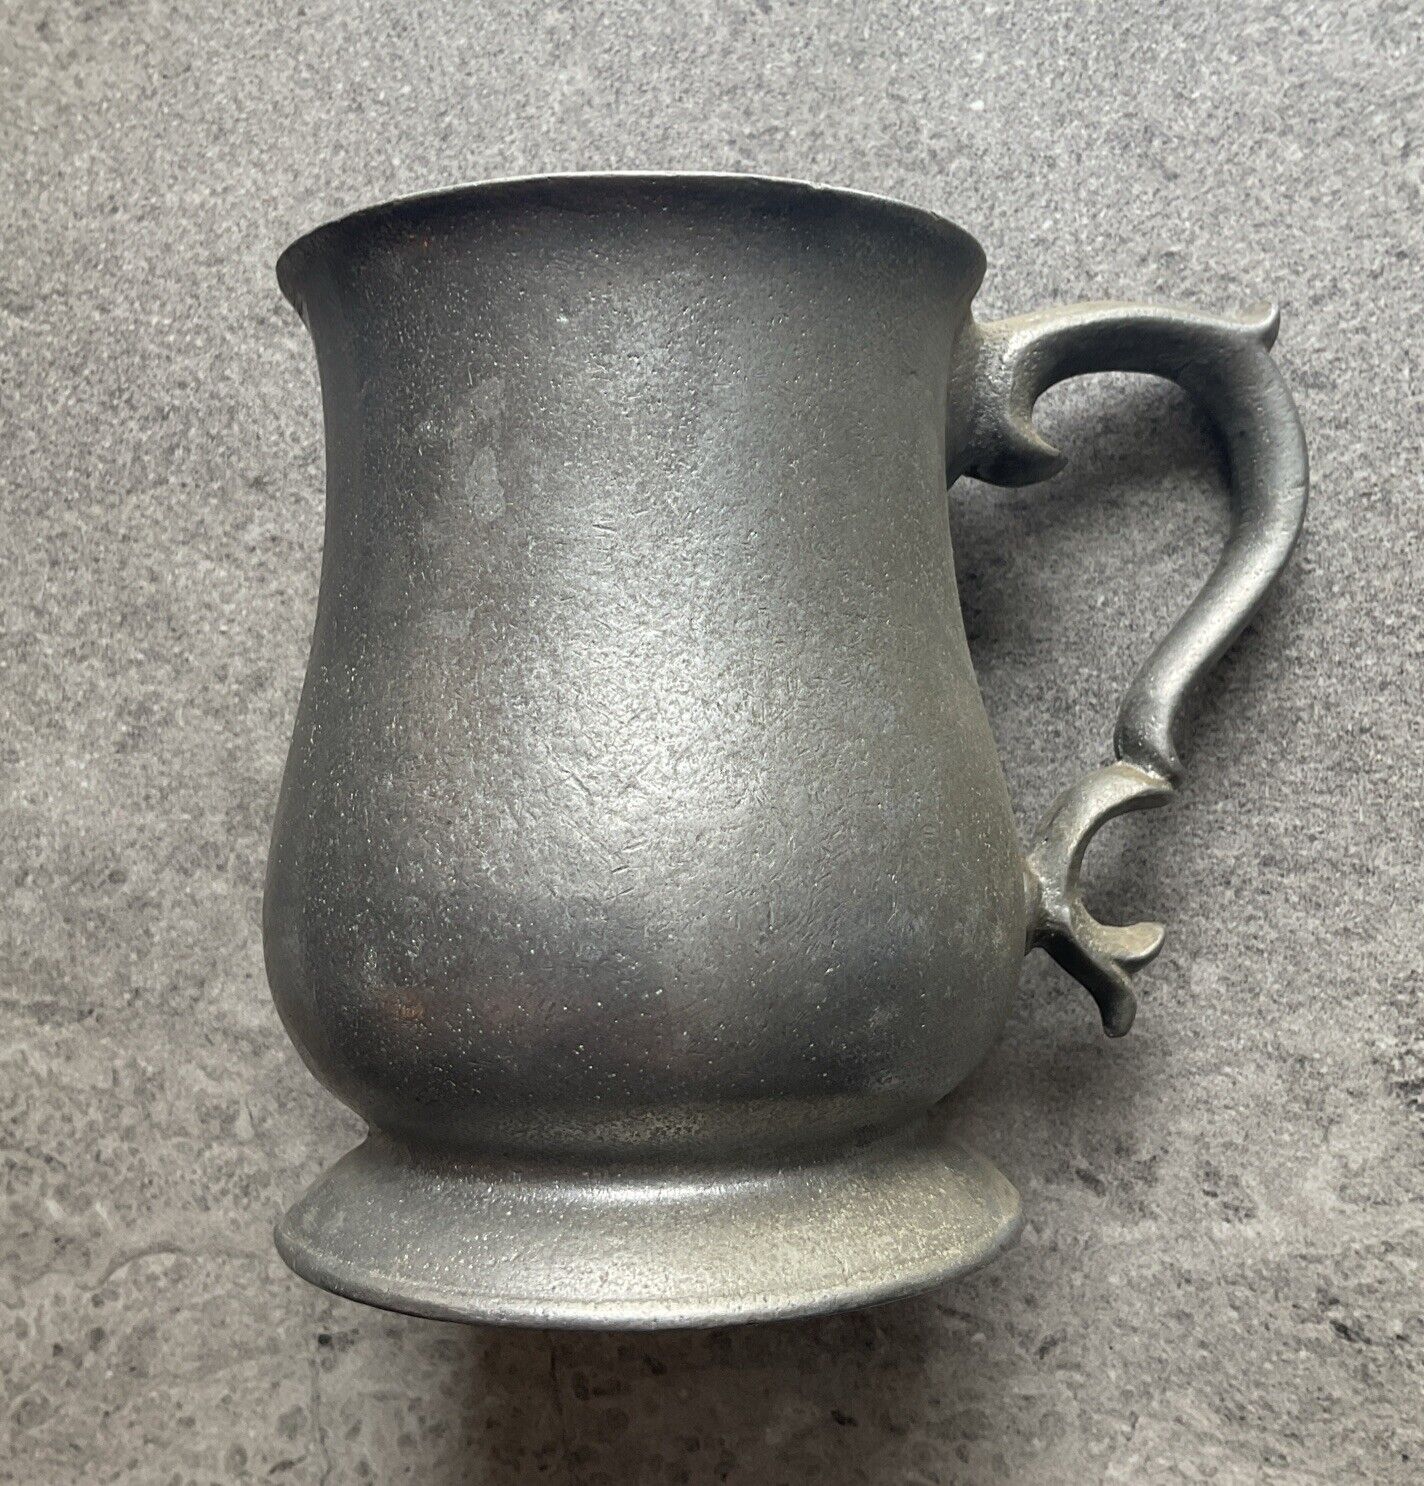 Vintage Made In Taiwan Pewter Tankard 4.5 inch Tall Cup Mug Beer Steins